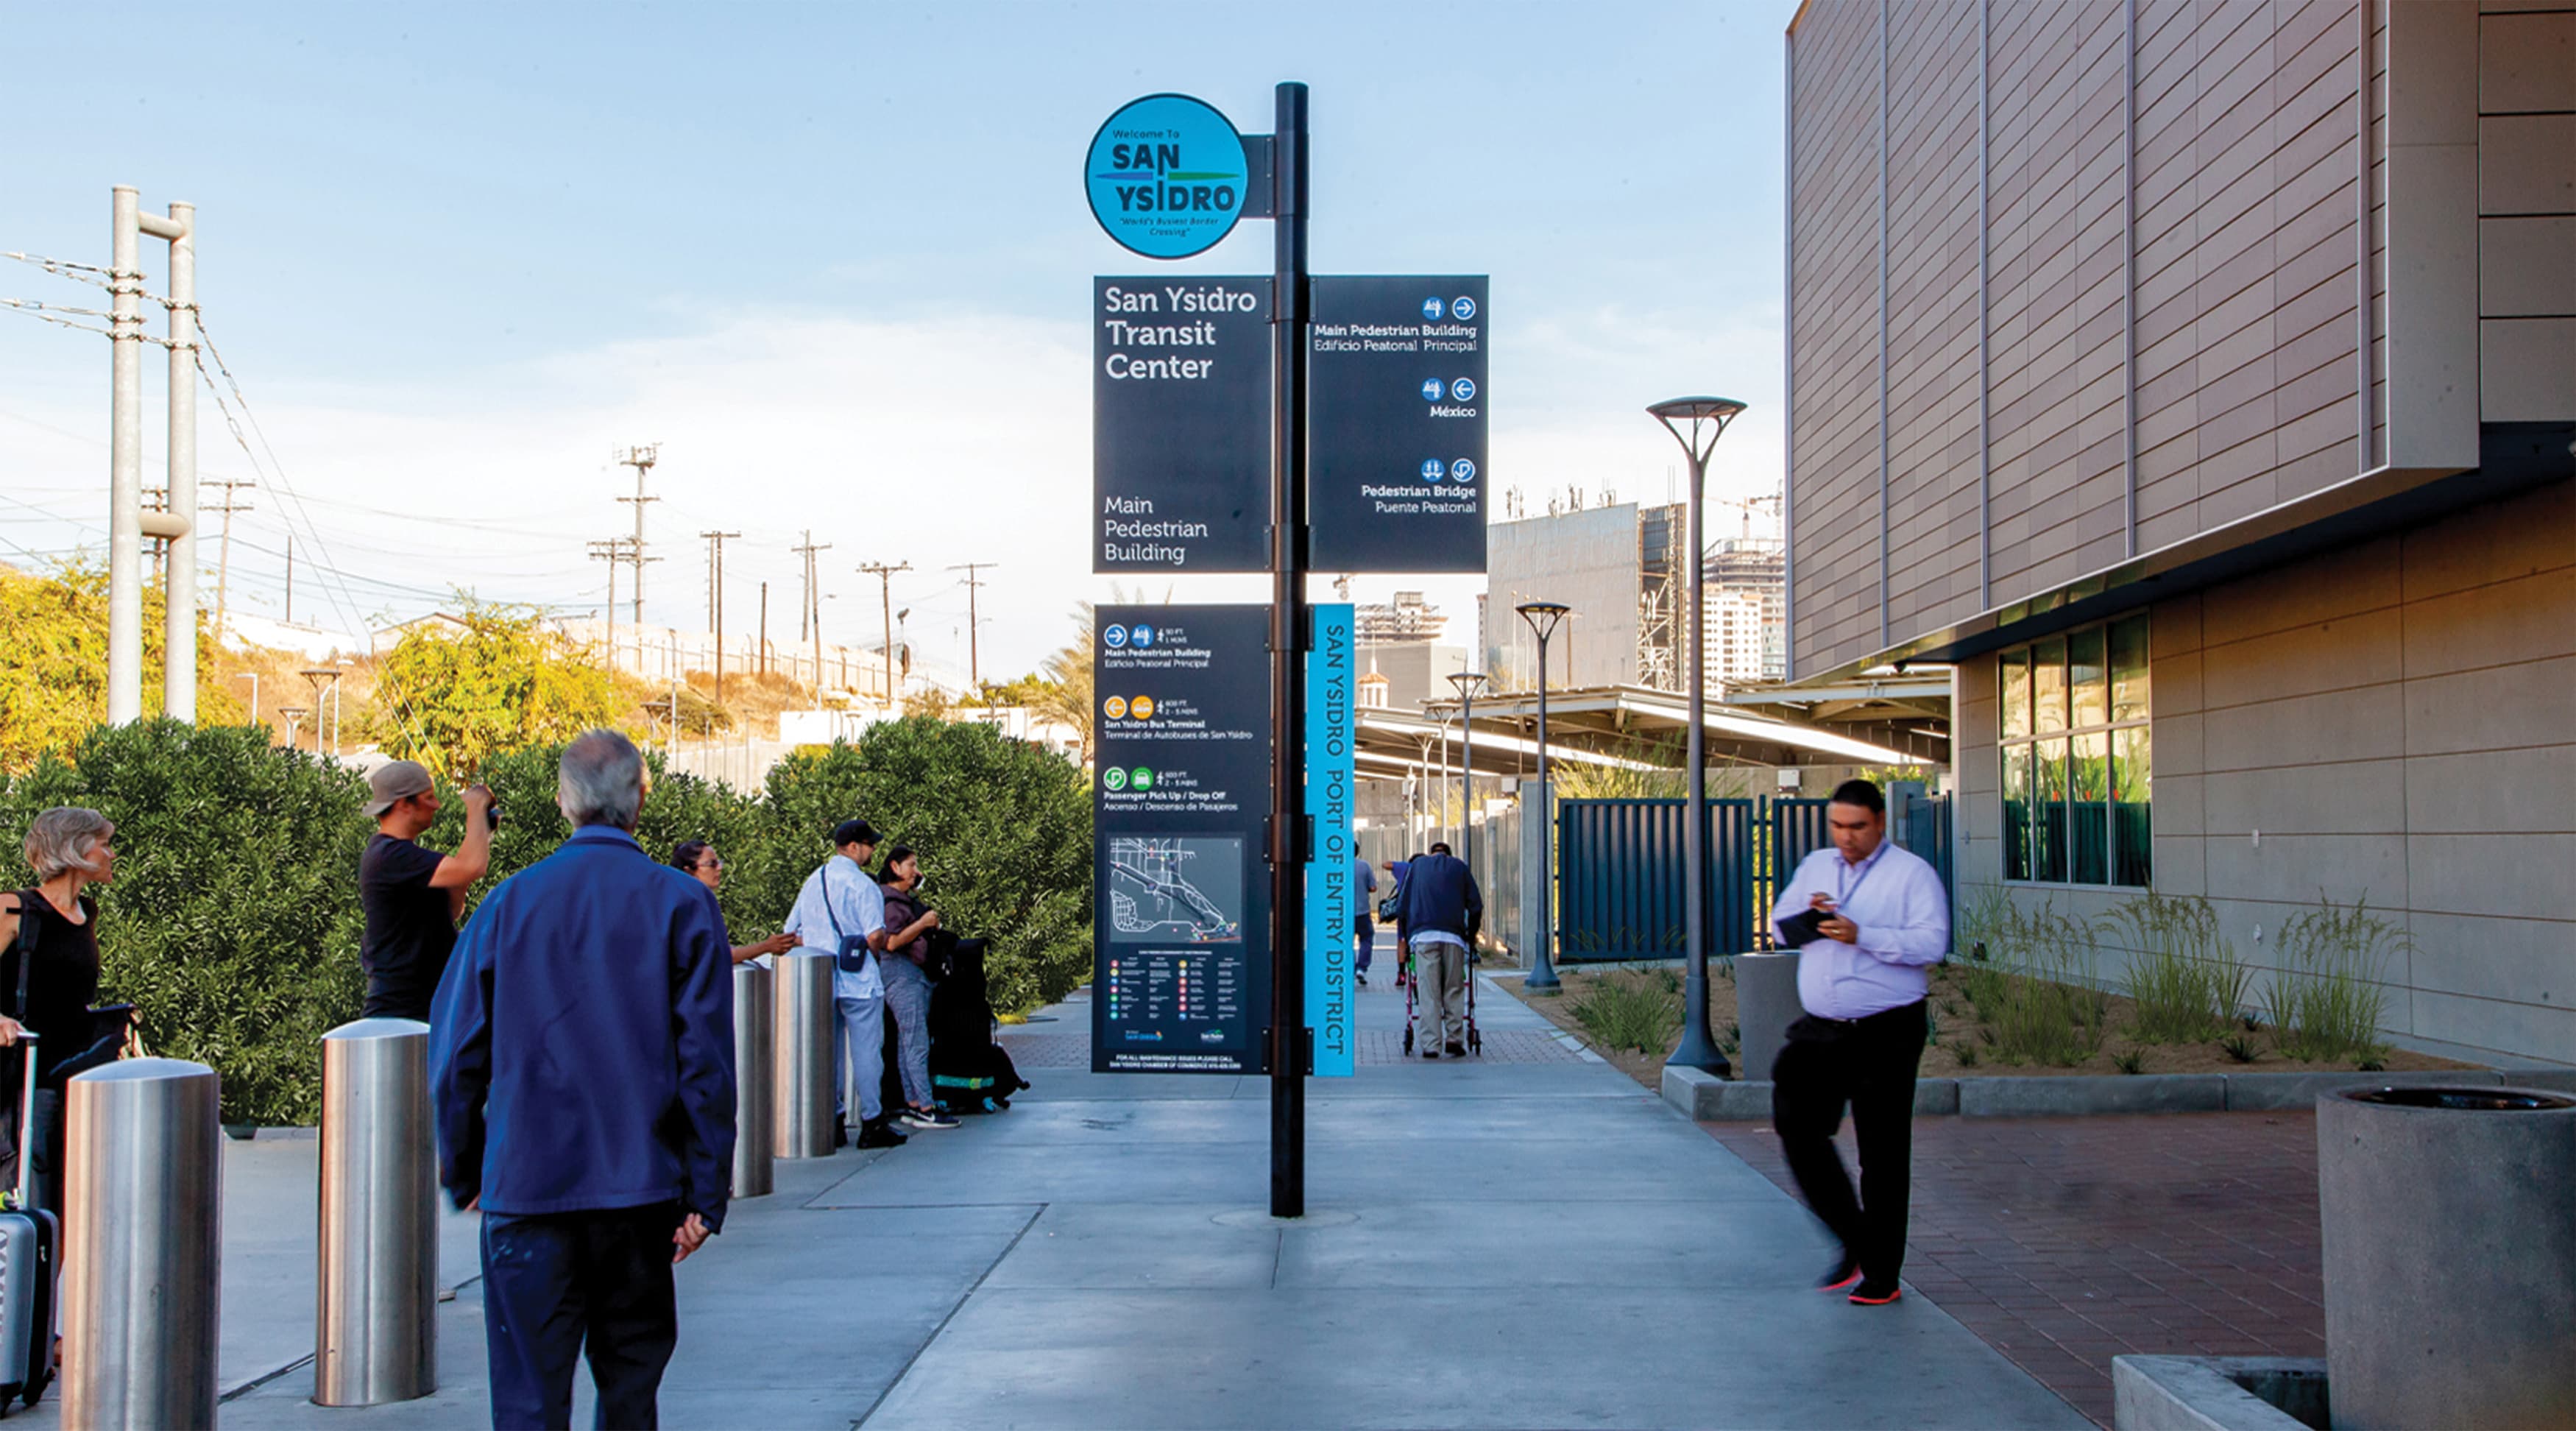 San Ysidro Port of Entry pedestrian wayfinding system and directory map